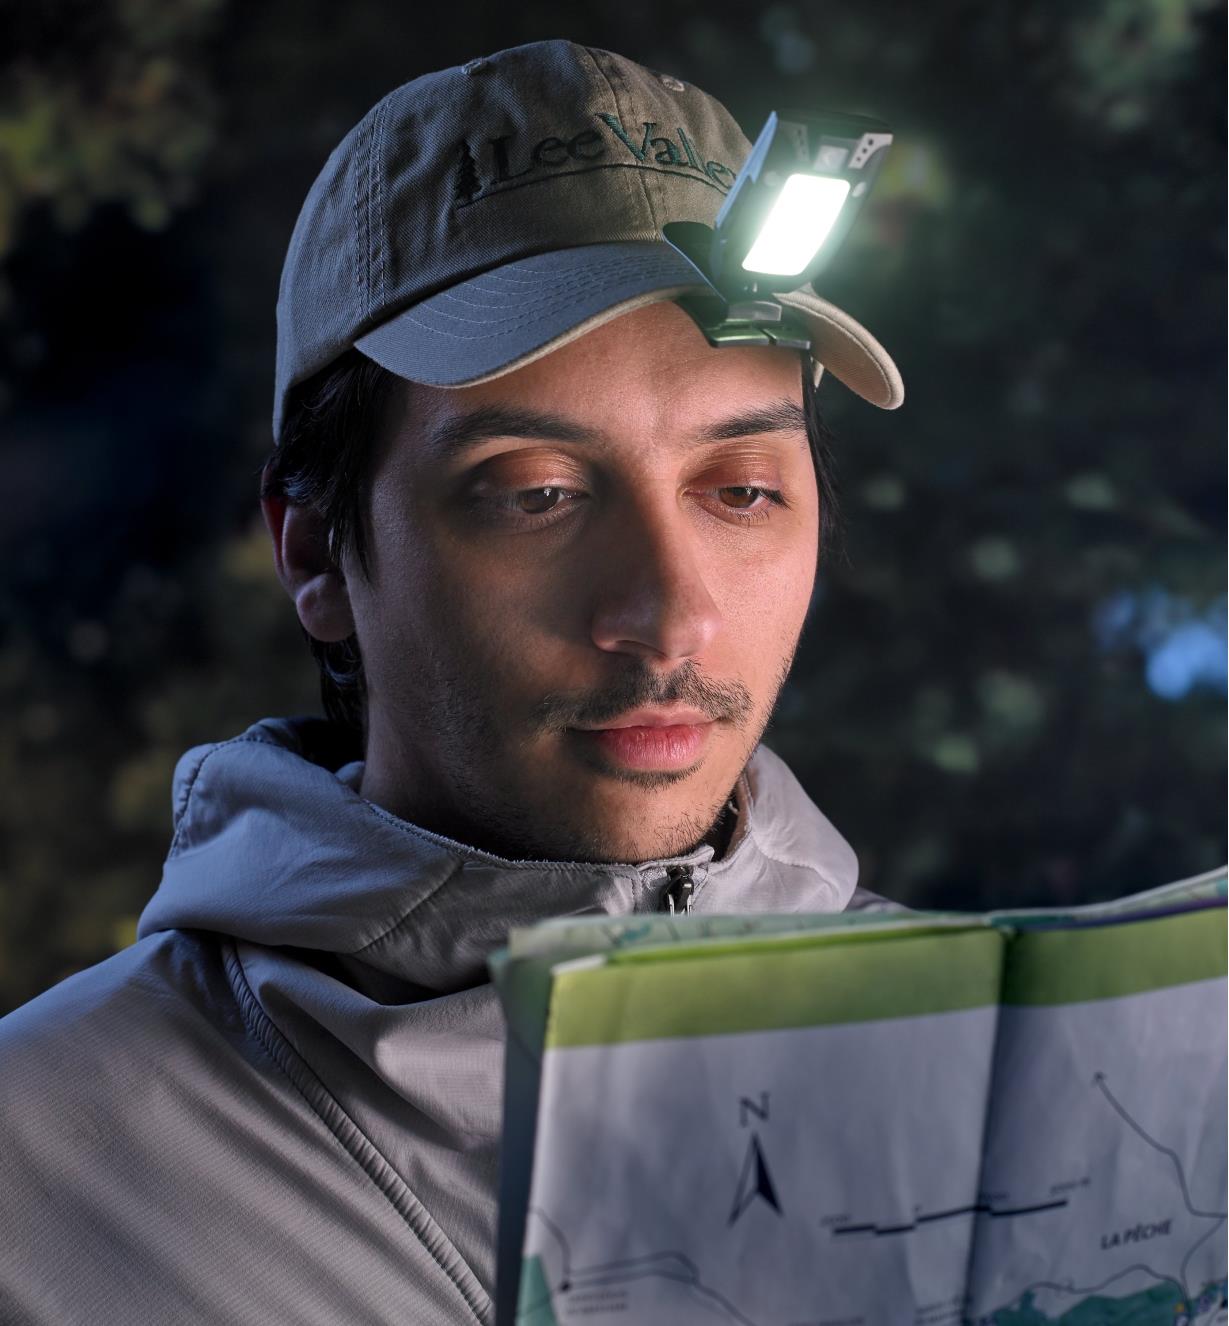 Reading a map in low light with the multi-function LED headlamp clipped to a cap brim